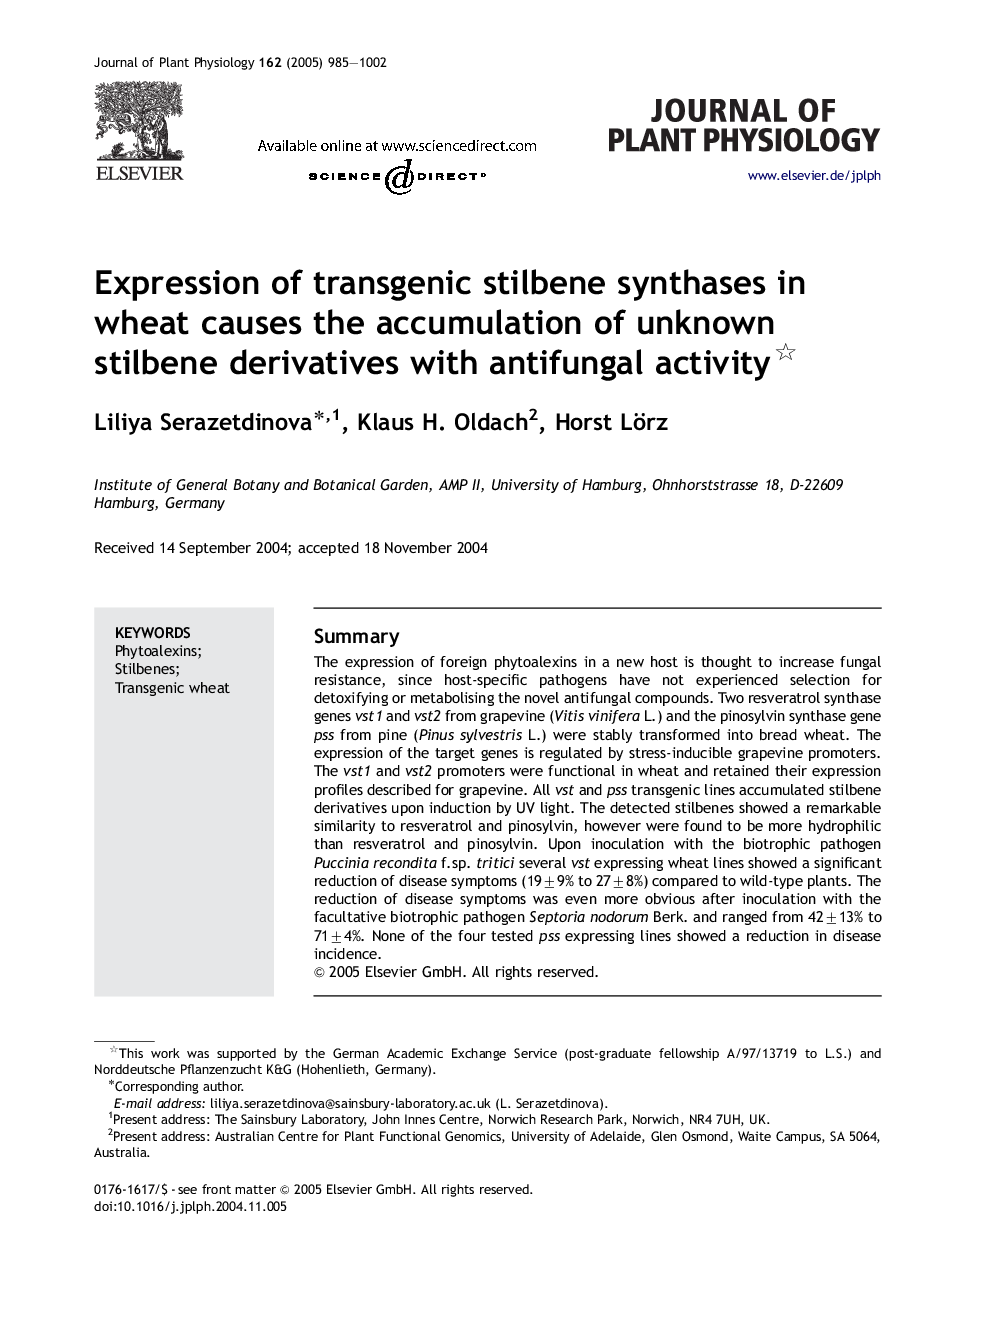 Expression of transgenic stilbene synthases in wheat causes the accumulation of unknown stilbene derivatives with antifungal activity